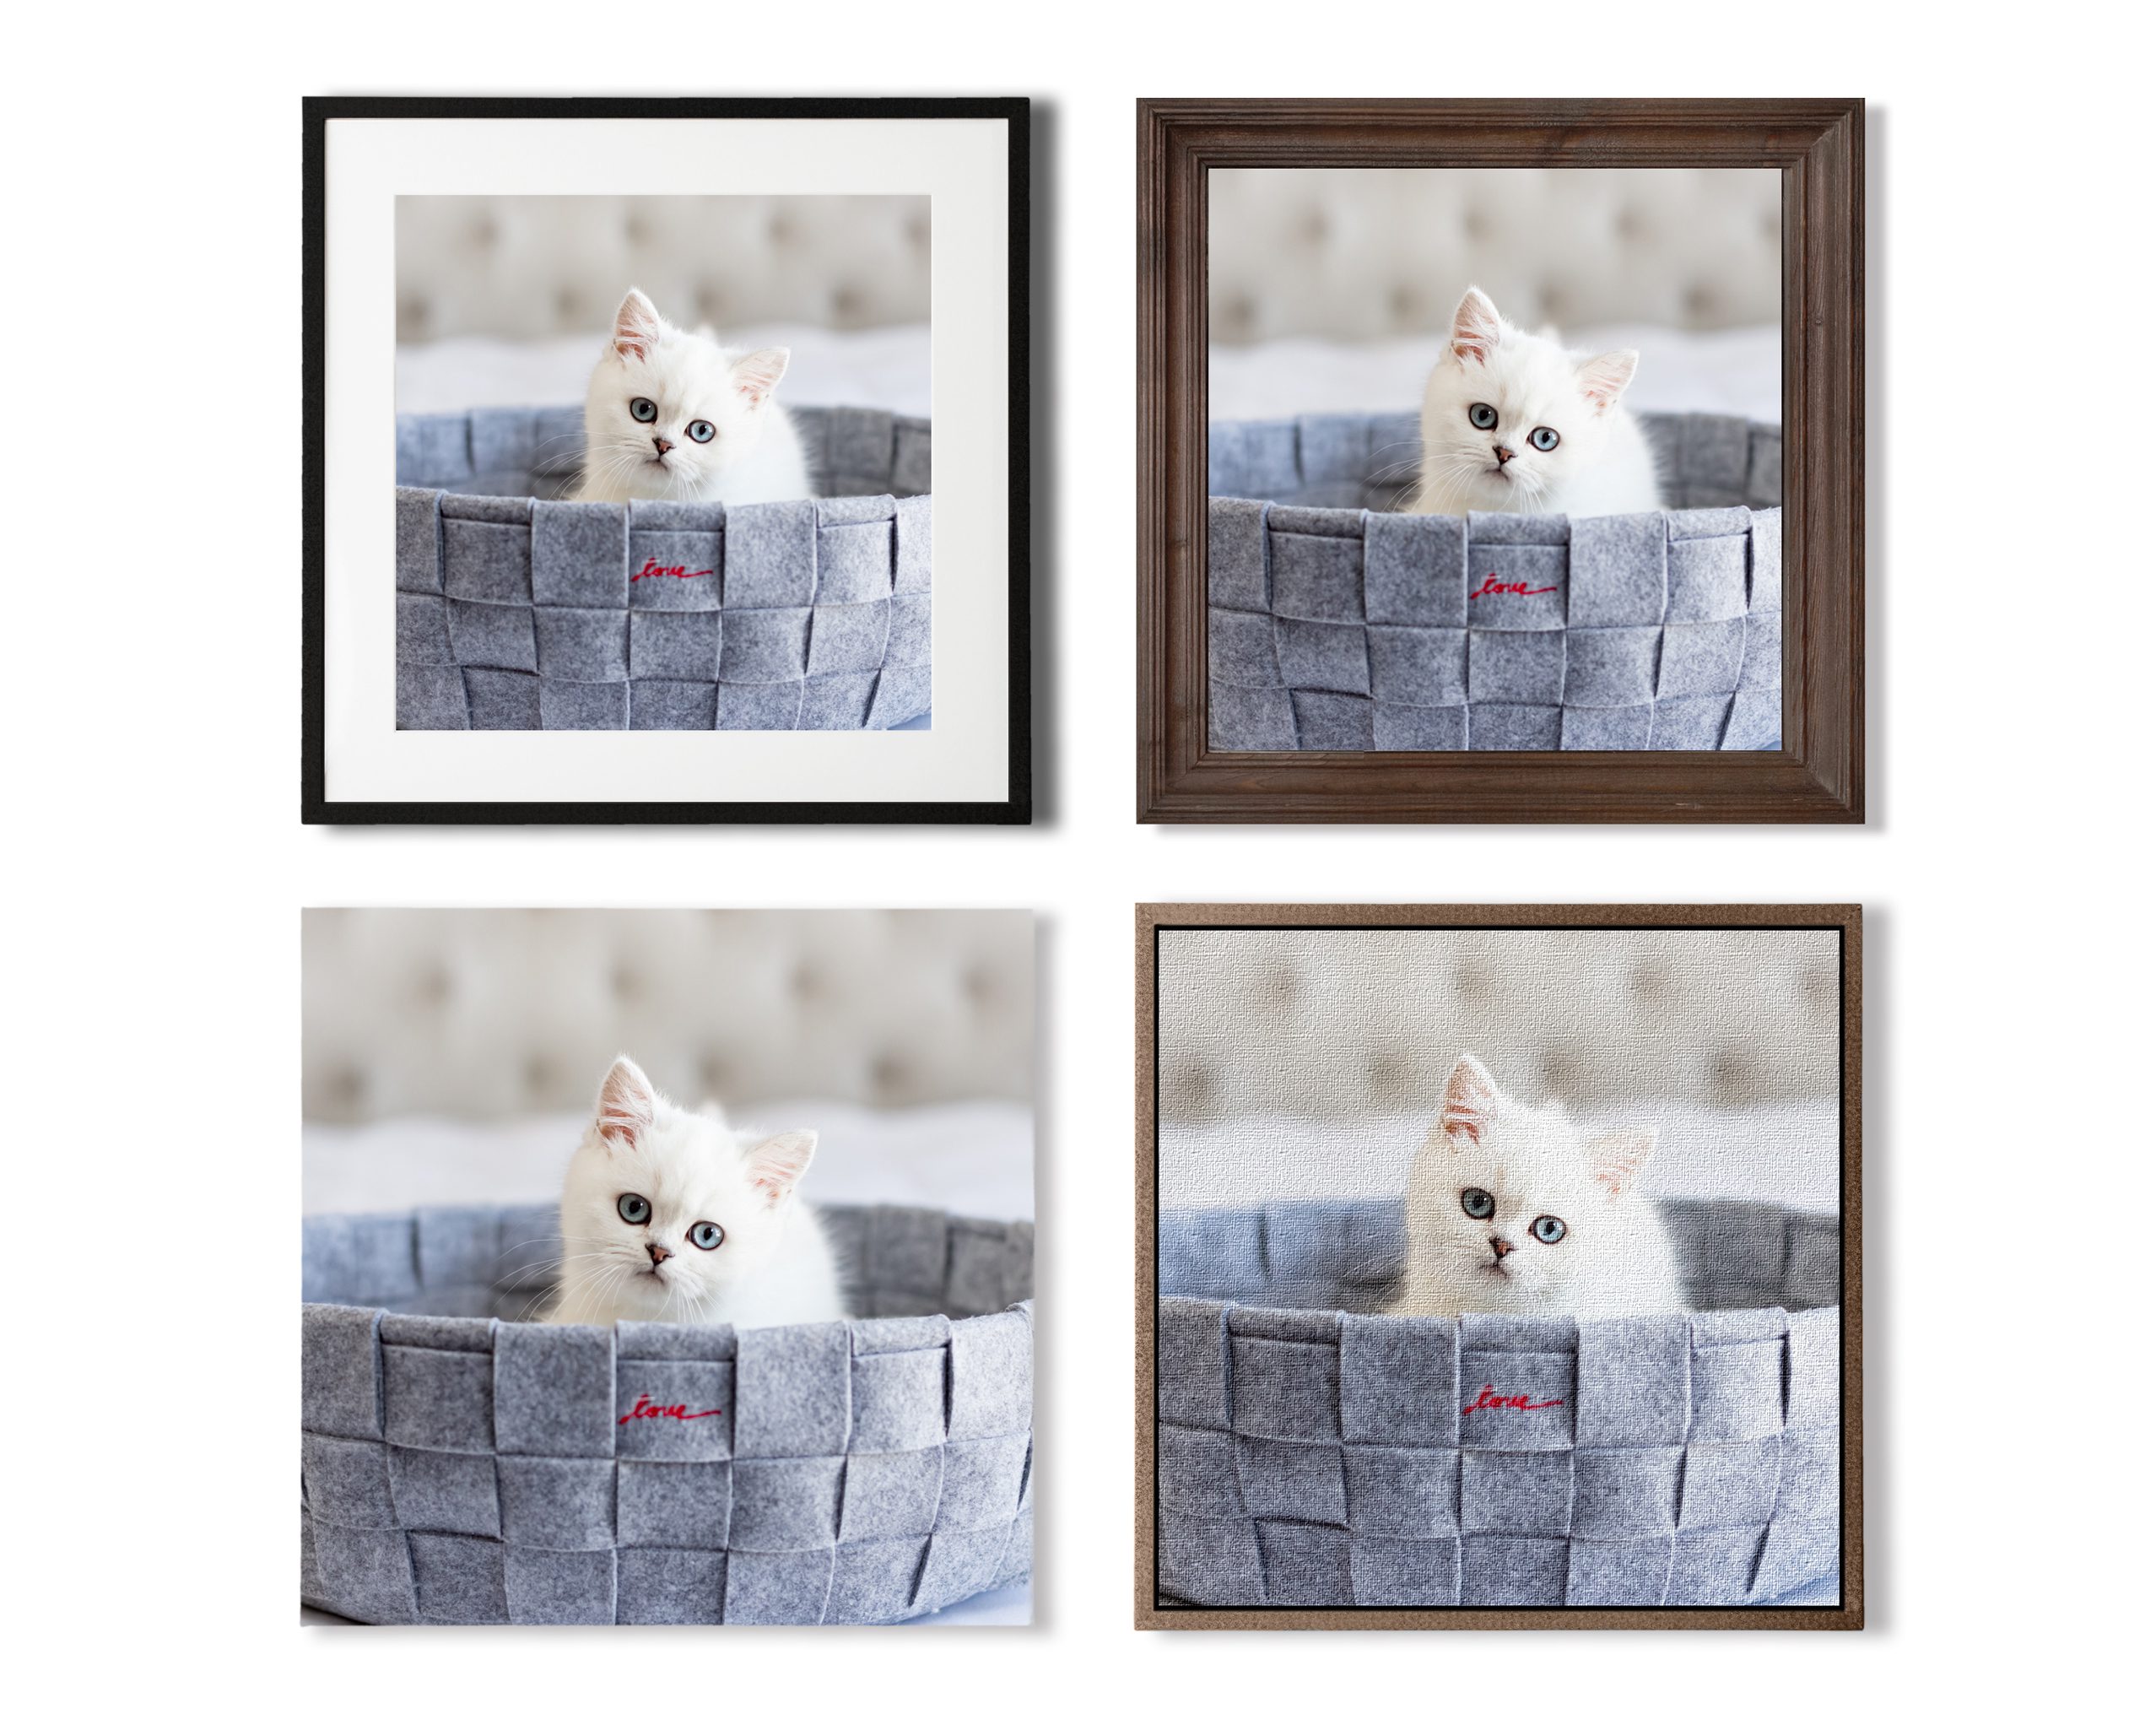 Wall portraits of cats in different frames